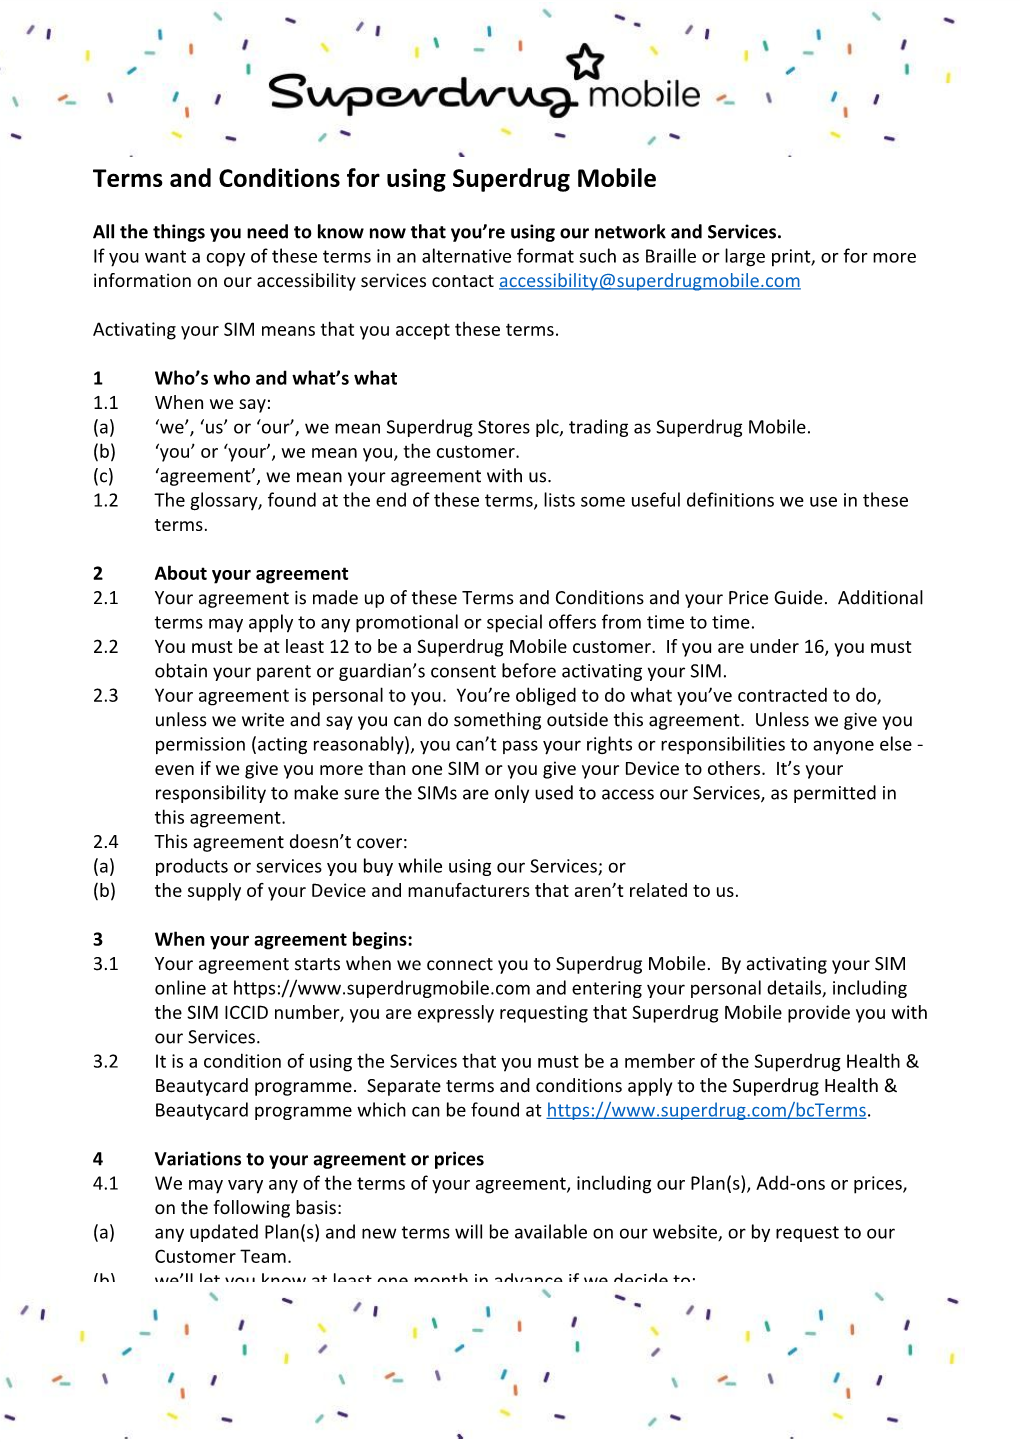 Terms and Conditions for Using Superdrug Mobile